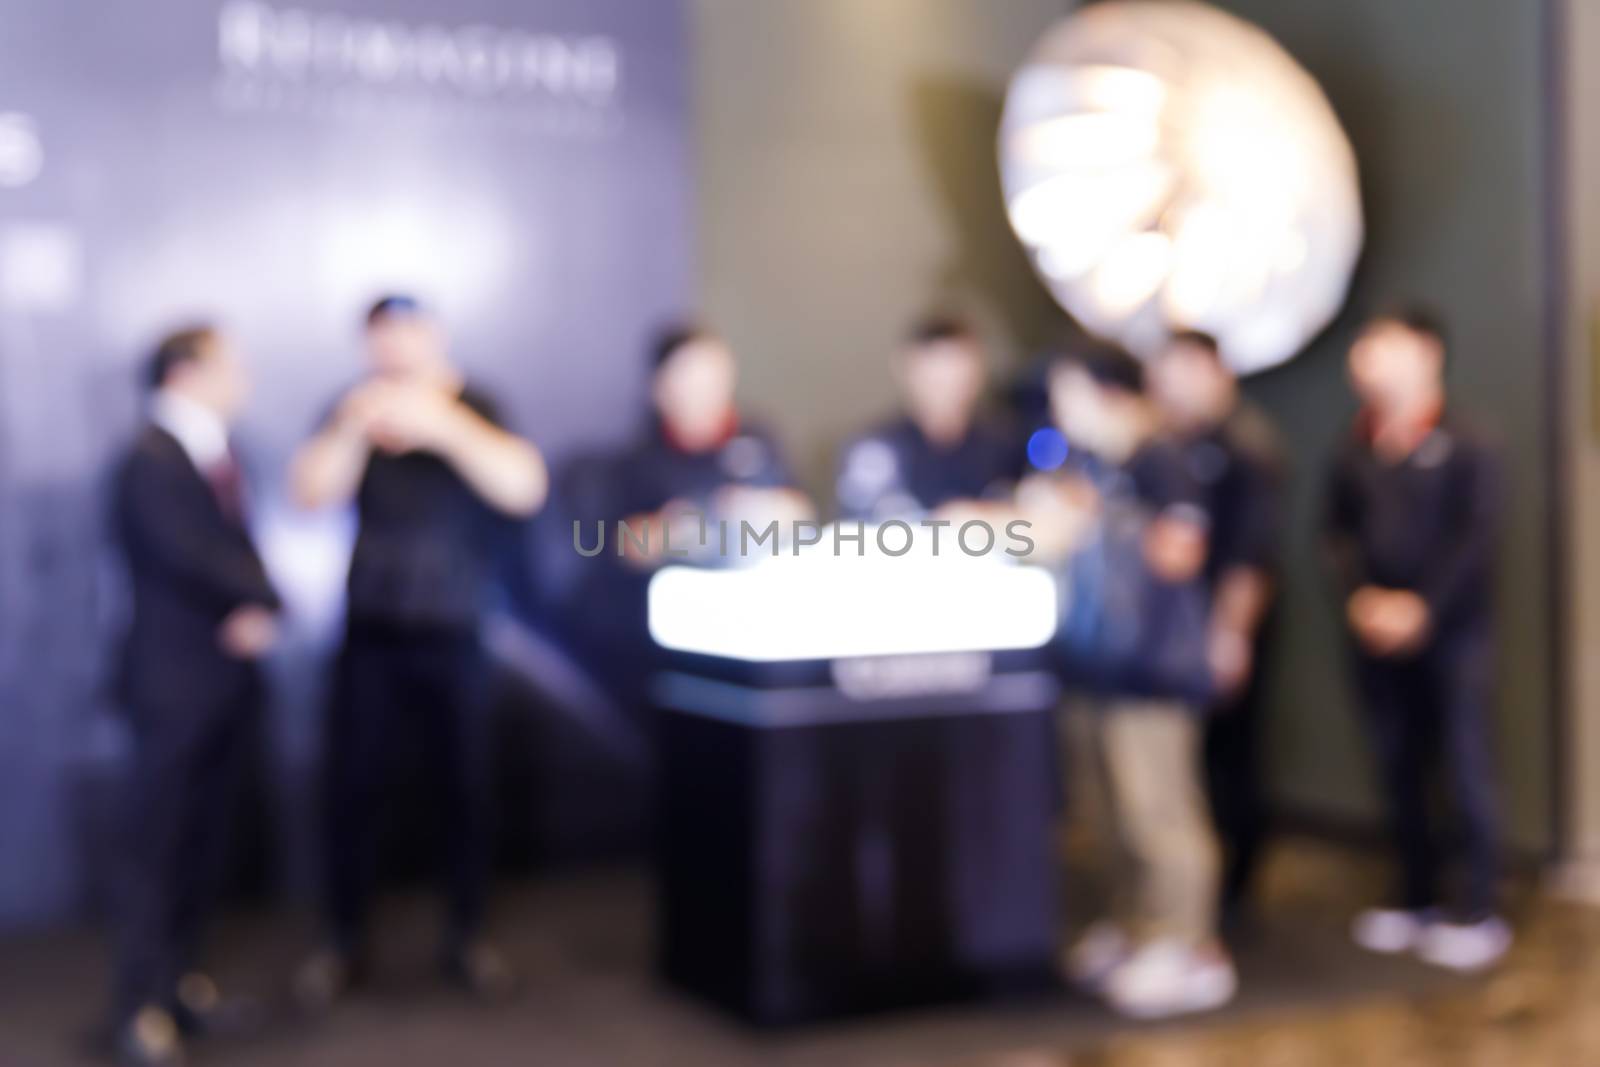 Blur people in press conference event by smuay